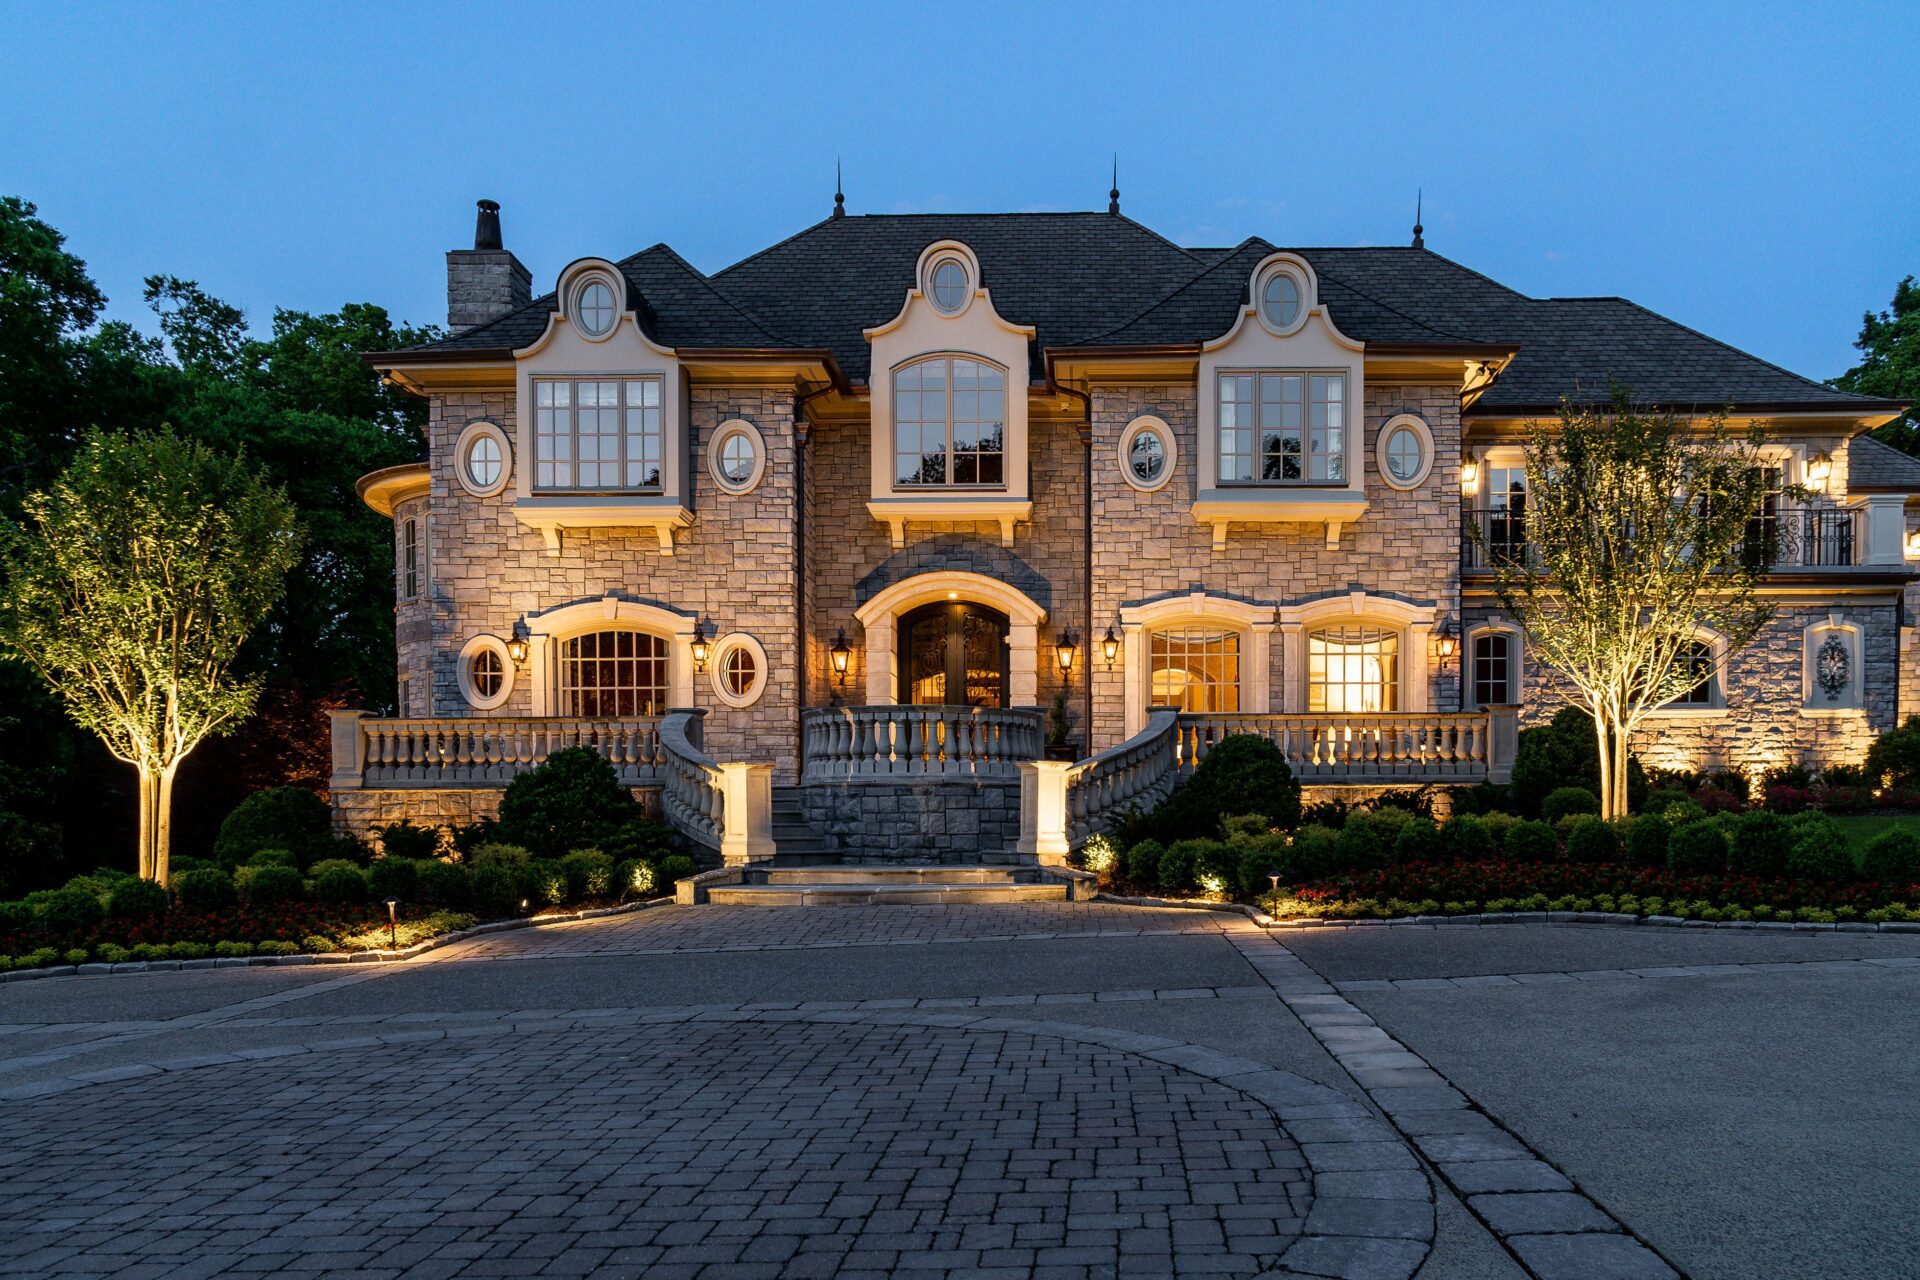 Outdoor lighting increasing the visual appeal and safety of a luxury home in Nashville, TN